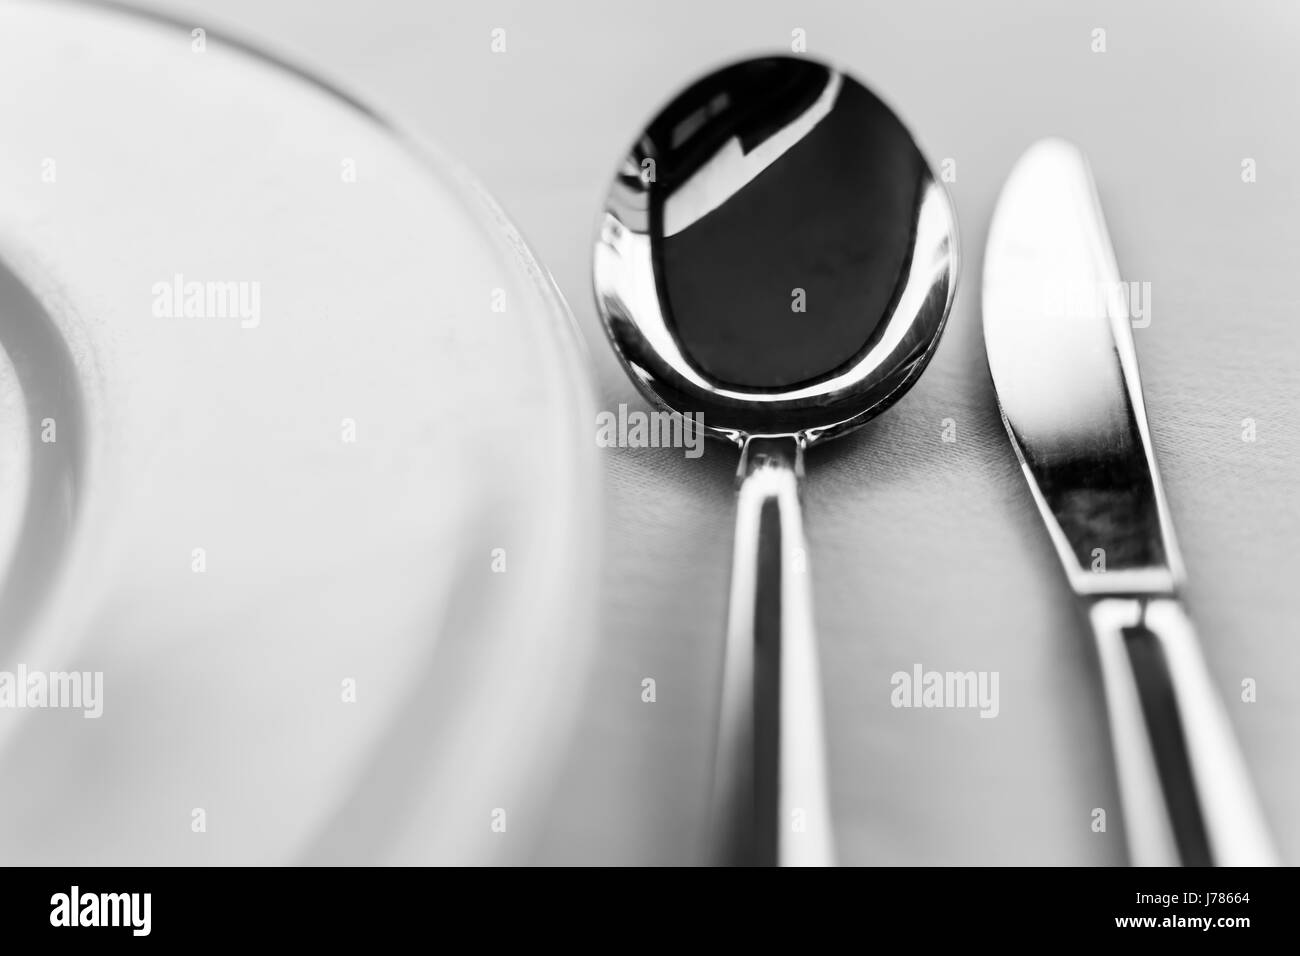 Cutlery Spoon, Knife and Plate as Fine Art Stock Photo